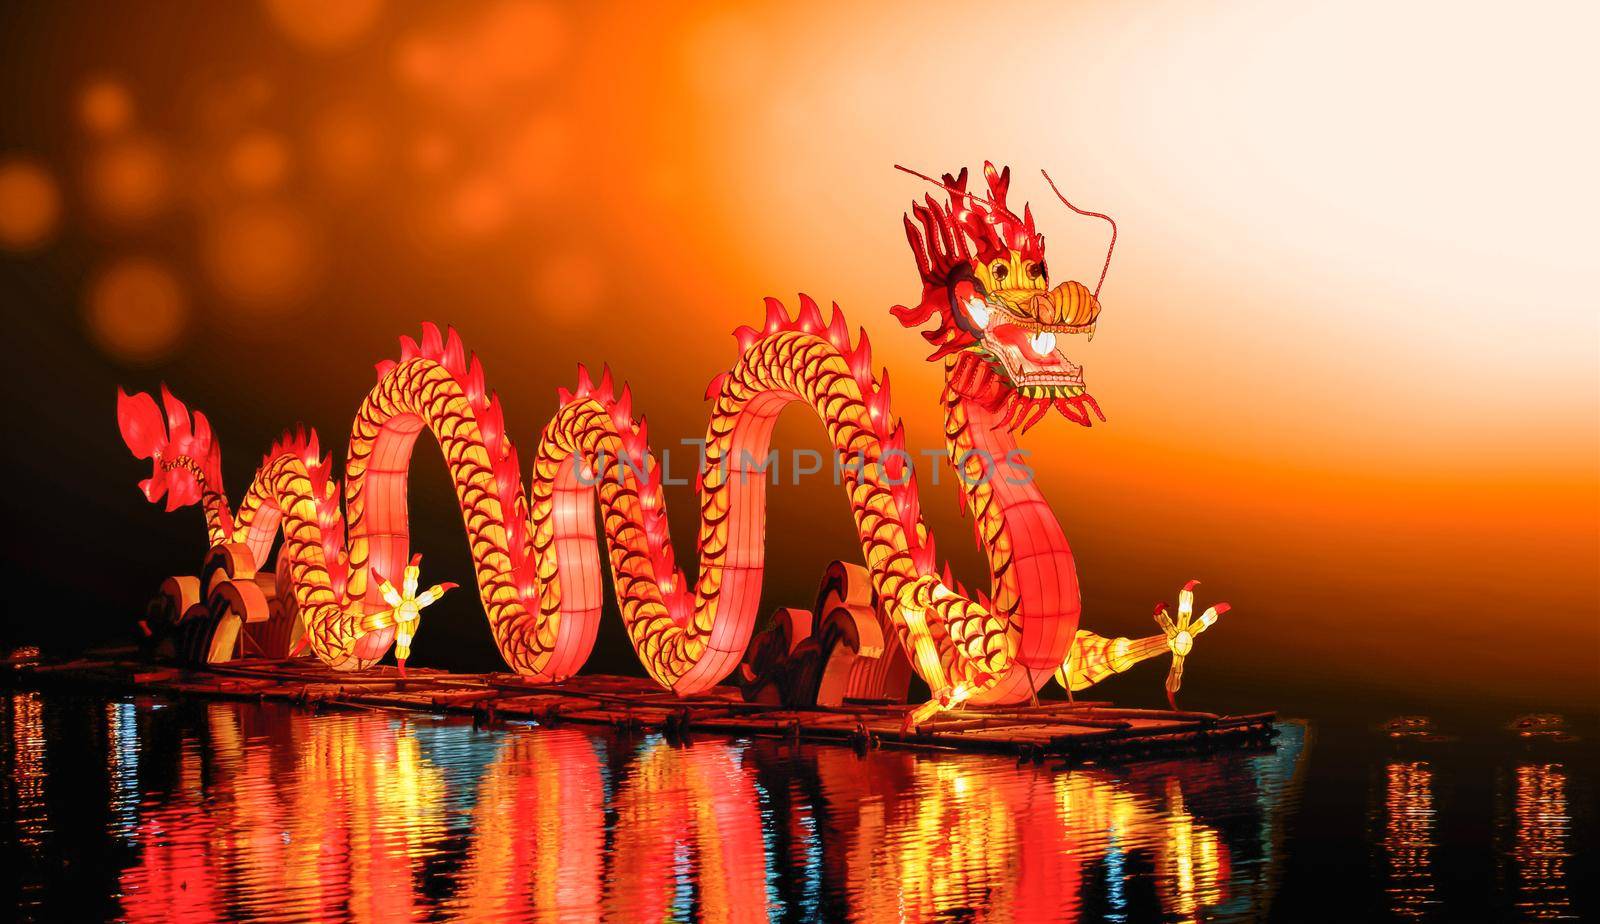 Dragon Chinese New Year by toa55